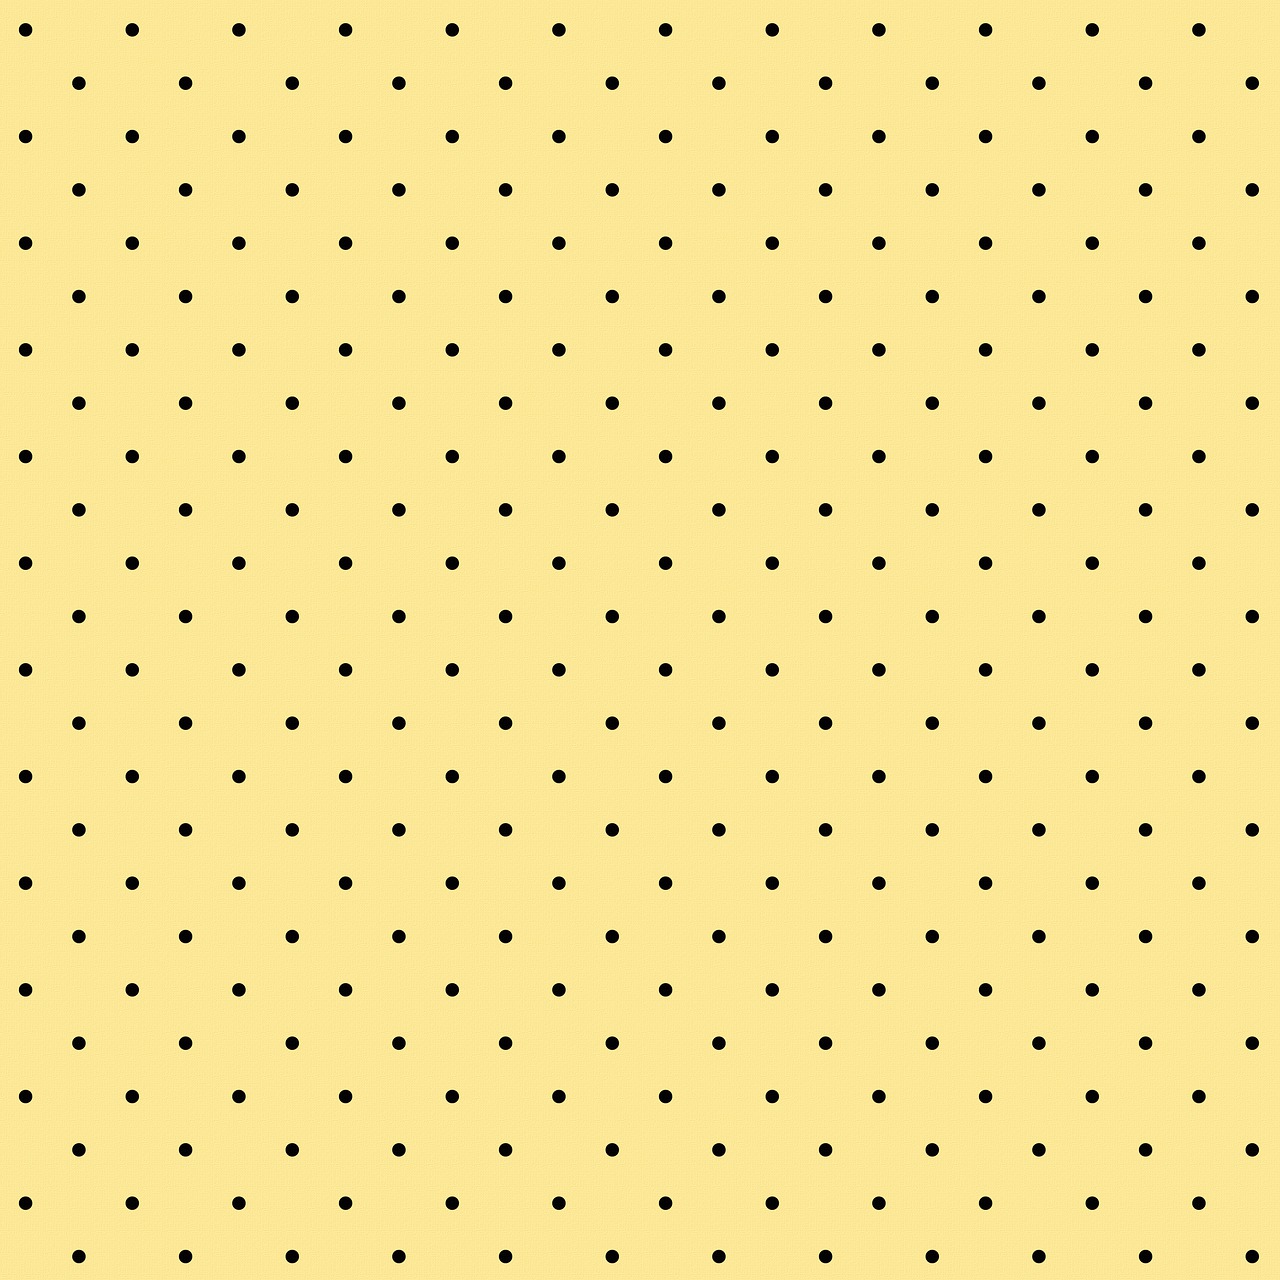 a yellow background with small black dots, pastelle, america, 1 2 0 0 dpi, mount